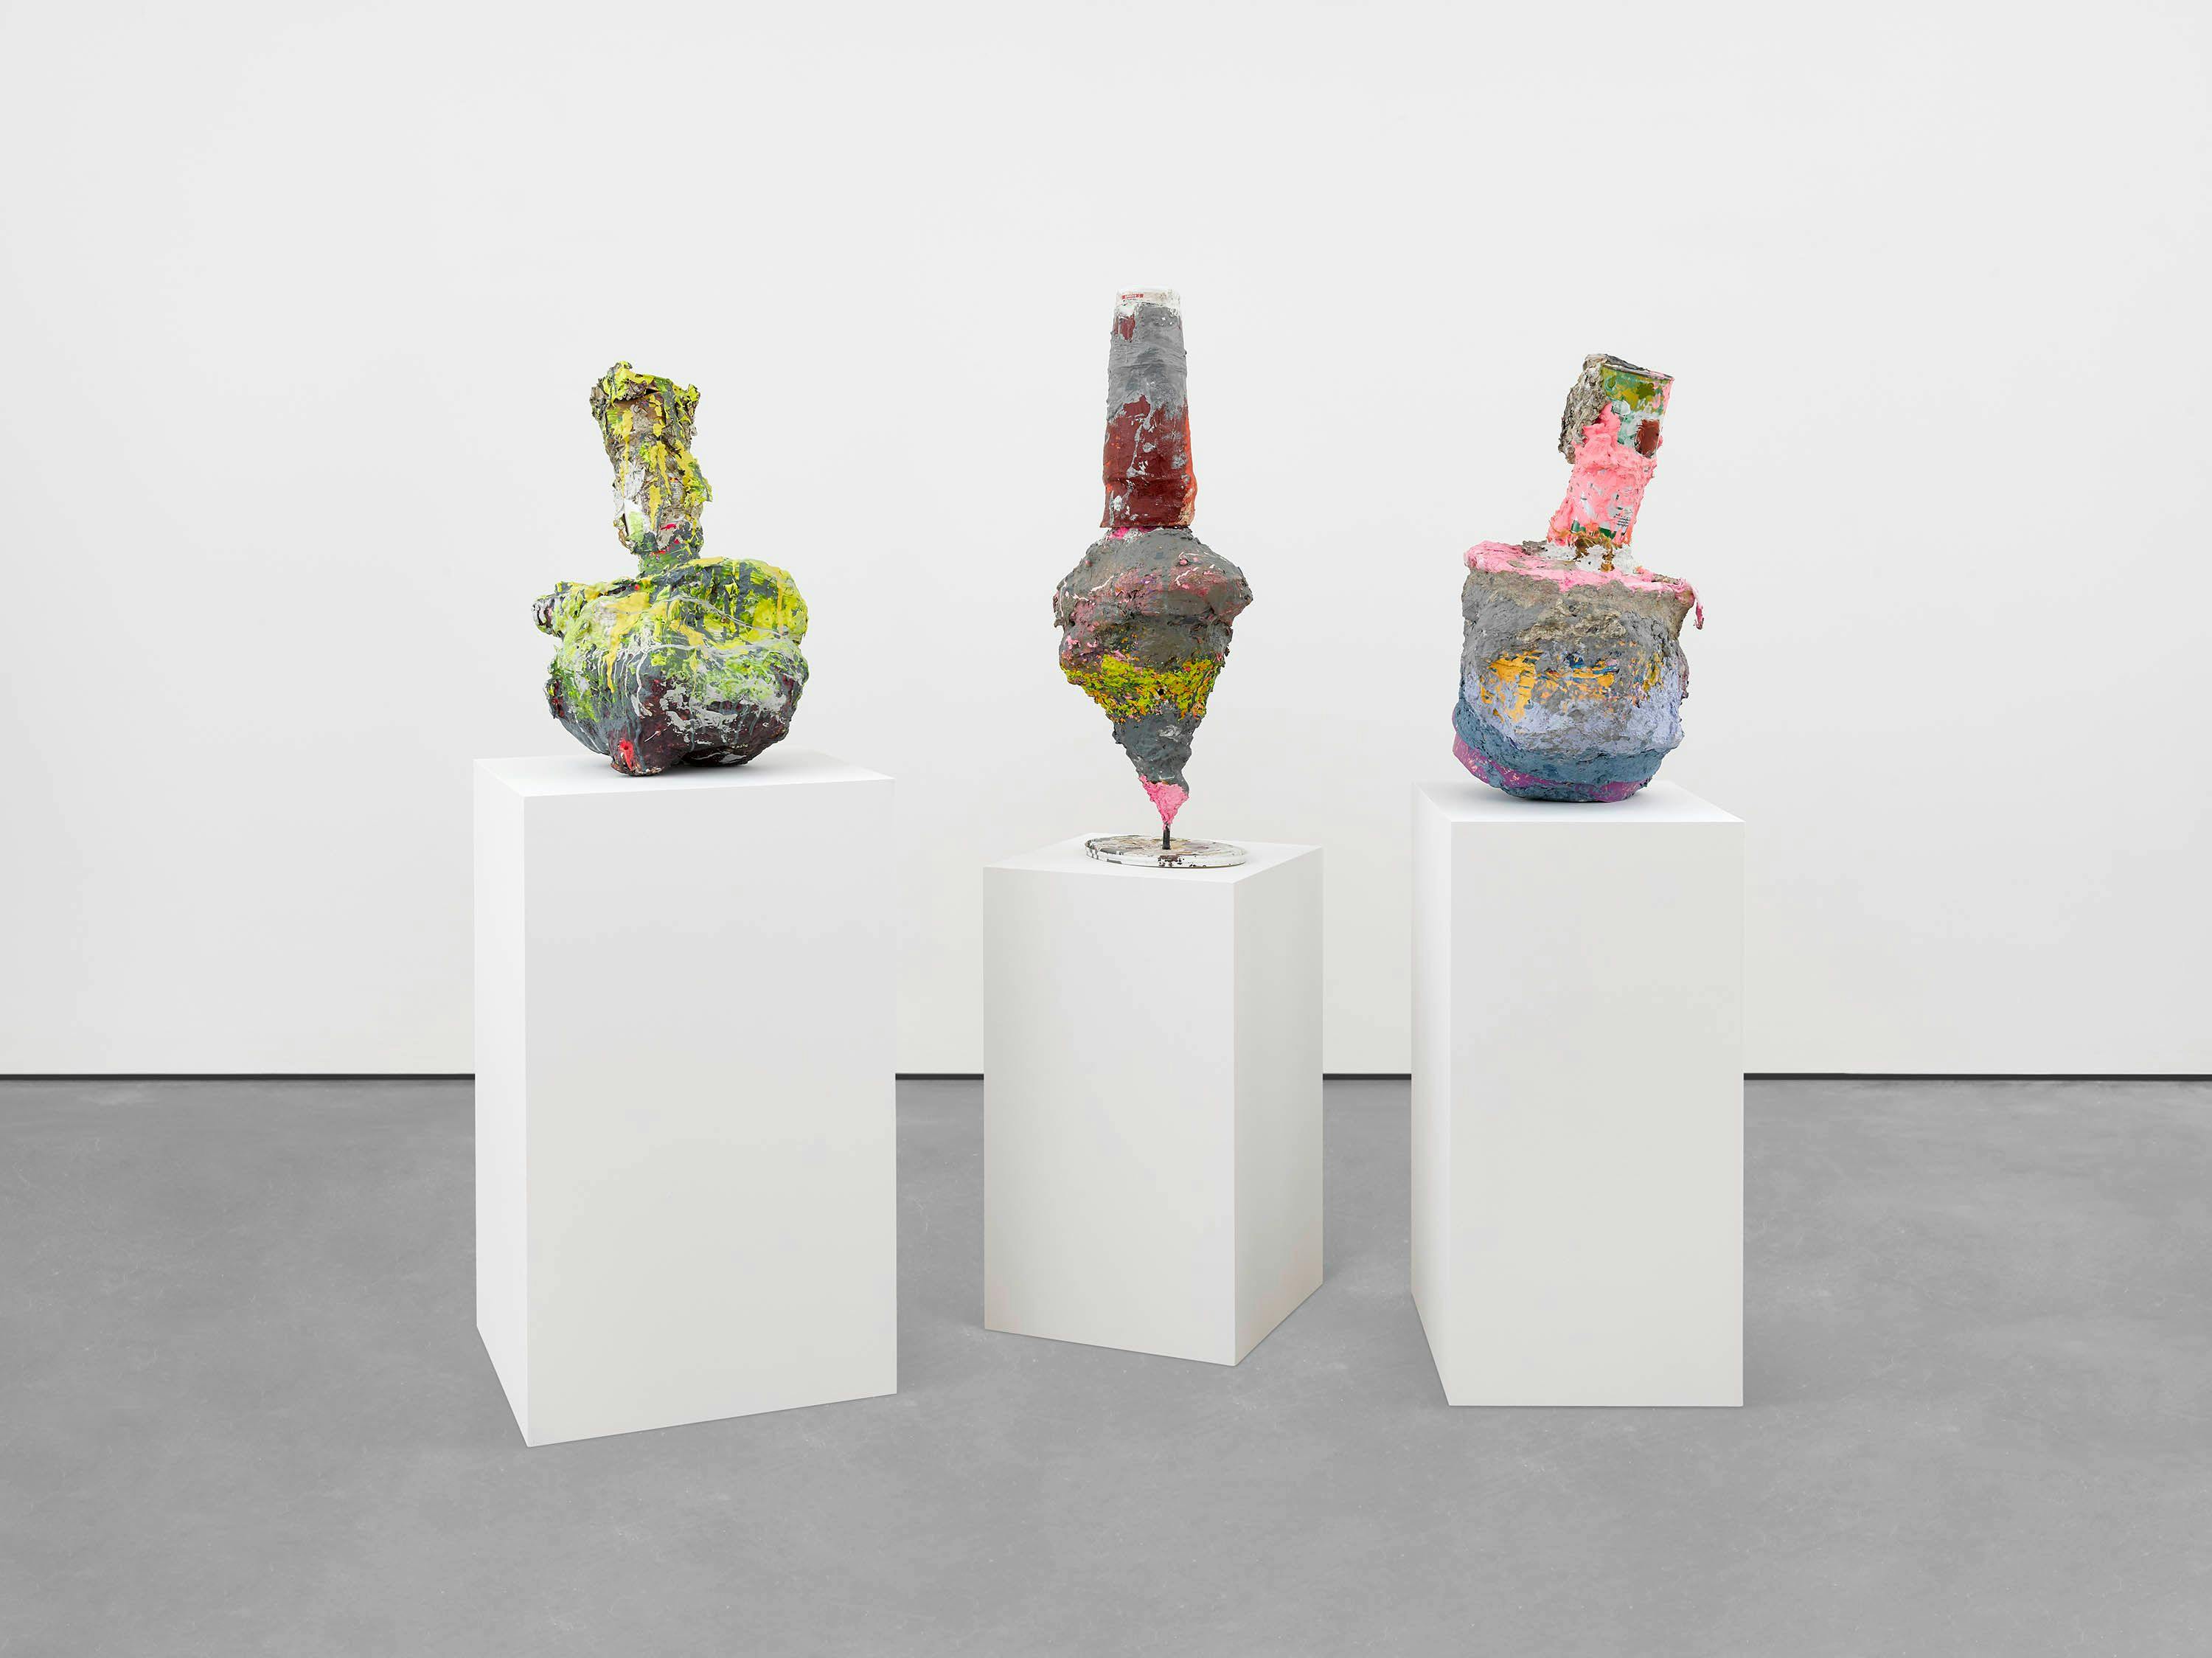 A sculpture by Franz West, titled Three Times the Same, dated 1998.